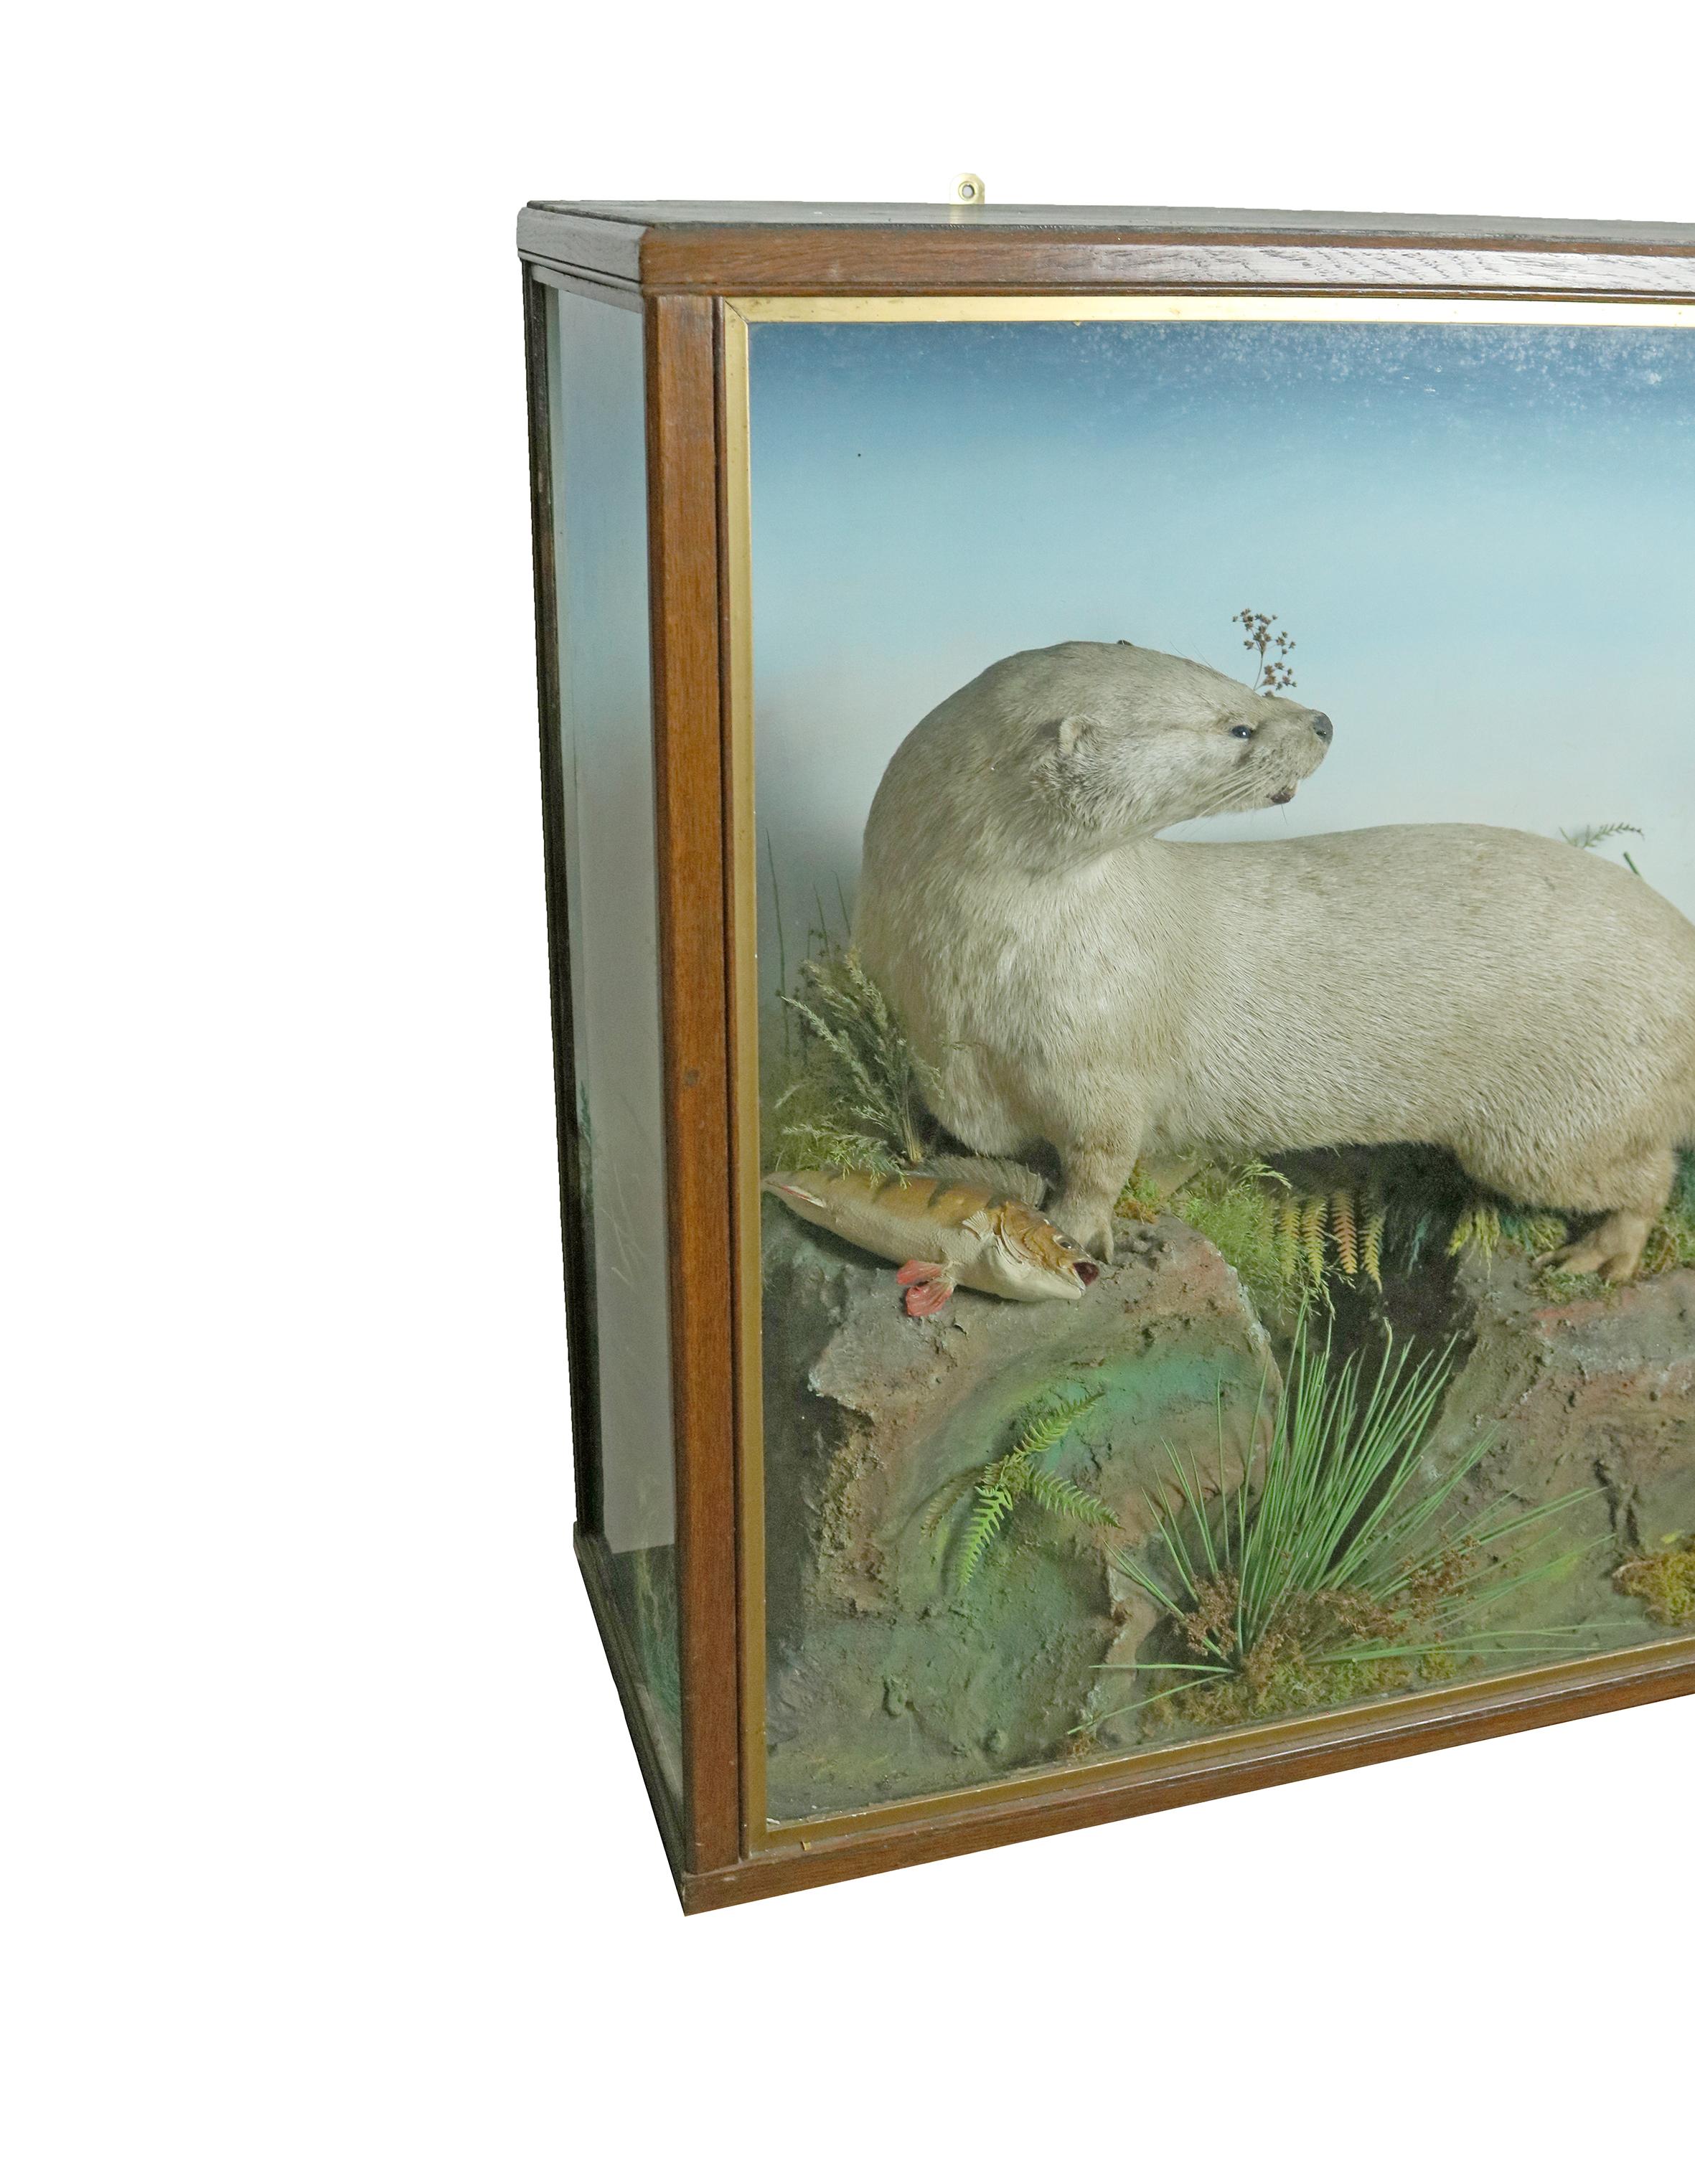 A Victorian taxidermy study of an otter in original case.

The otter is purched on a rock in a natural setting accompanied by a fish. The otter is seen inside a glass case with wooden frame.